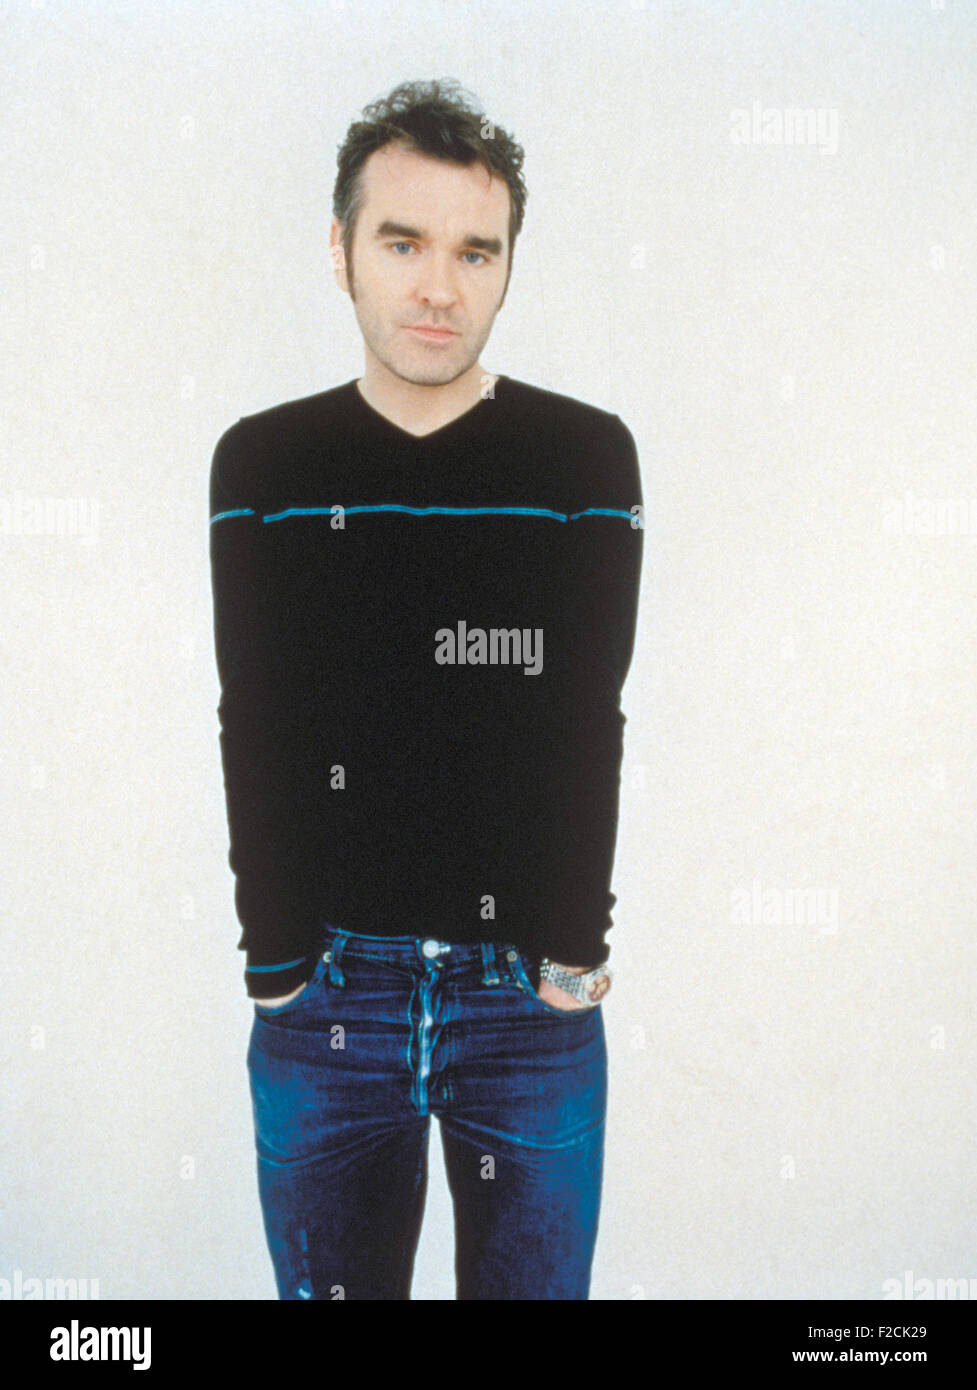 morrissey-island-records-promotional-photo-of-uk-rock-singer-about-F2CK29.jpg